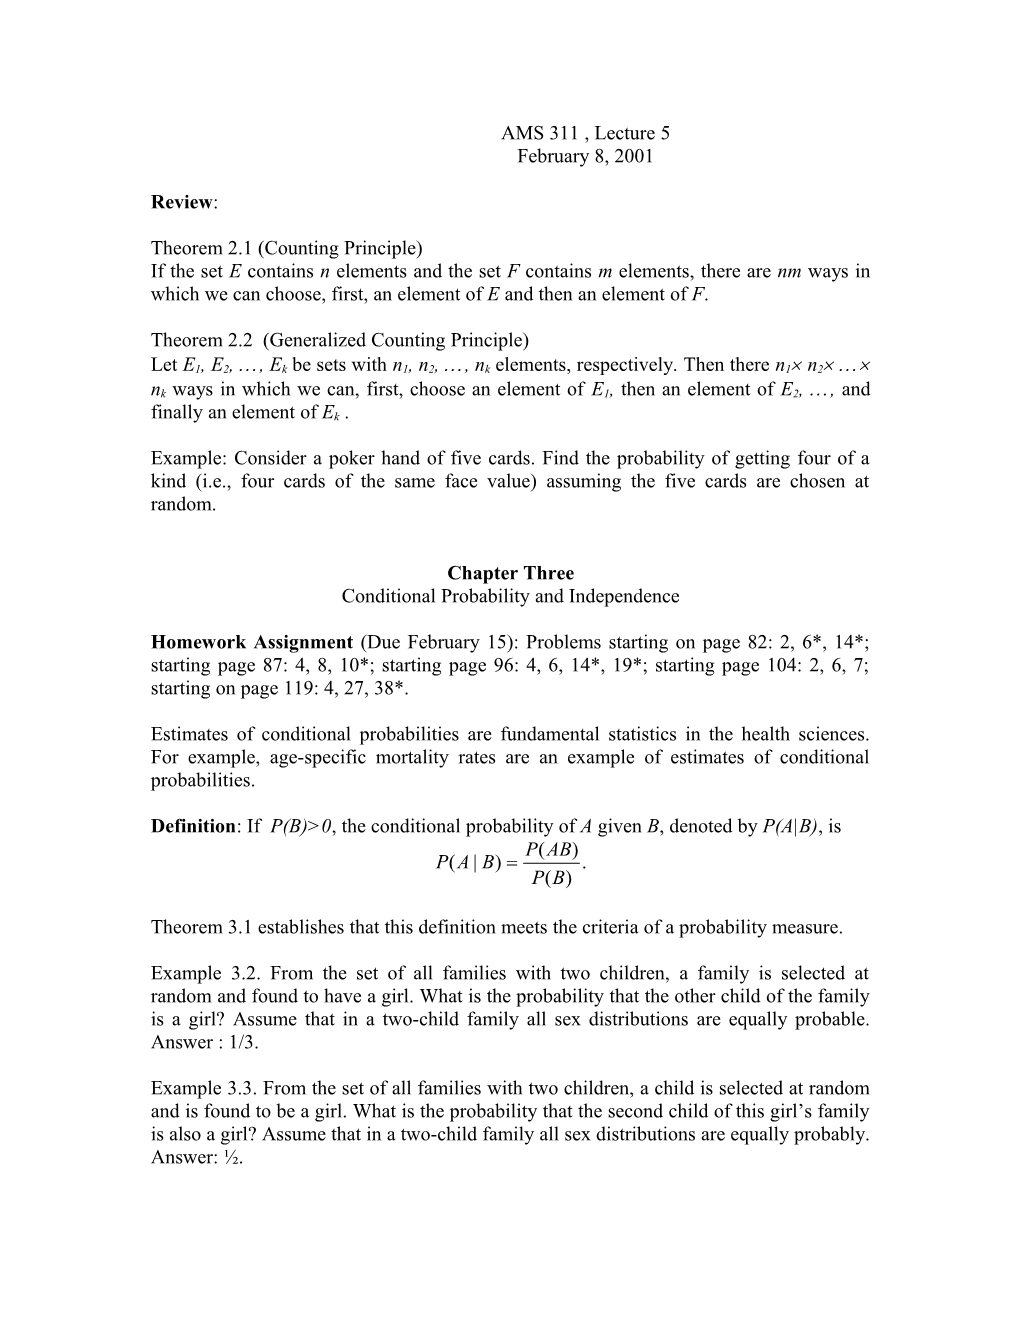 Theorem 2.2 (Generalized Counting Principle)